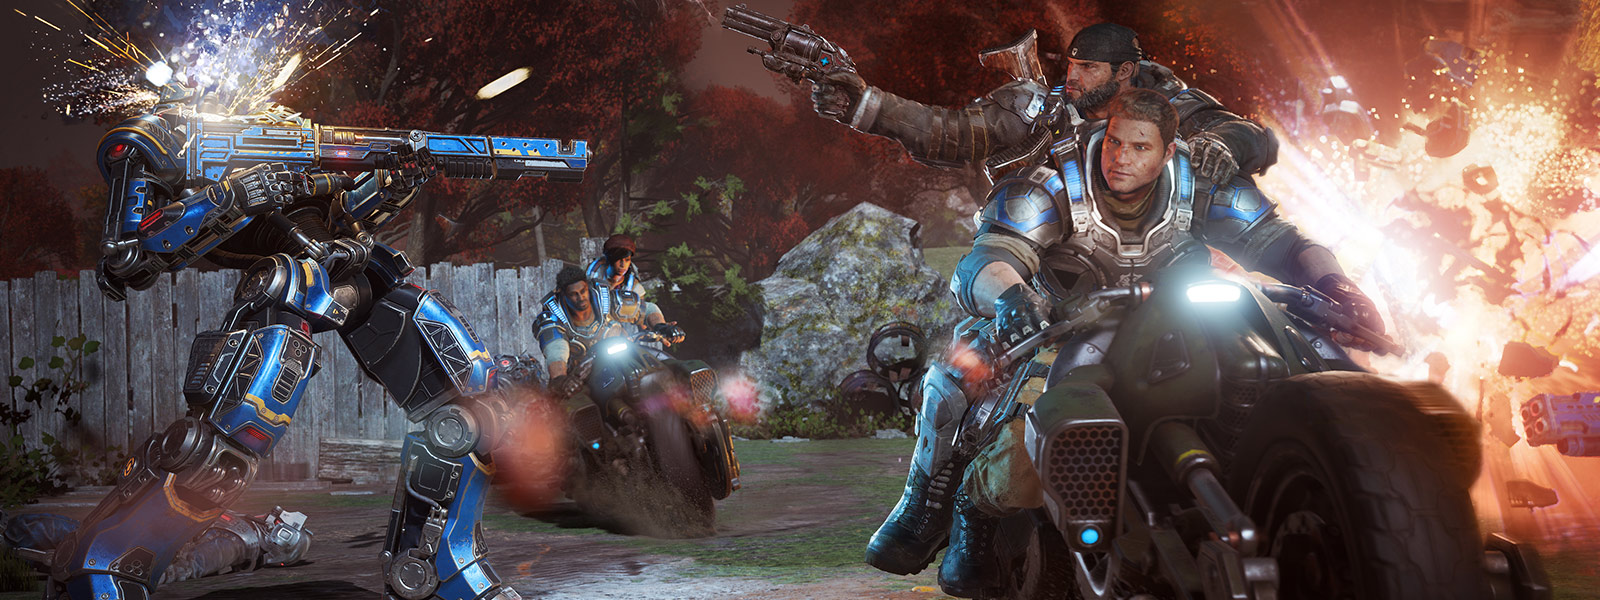 JD Fenix and his friends fire weapons and ride motorcycles during a battle from the game Gears of War 4